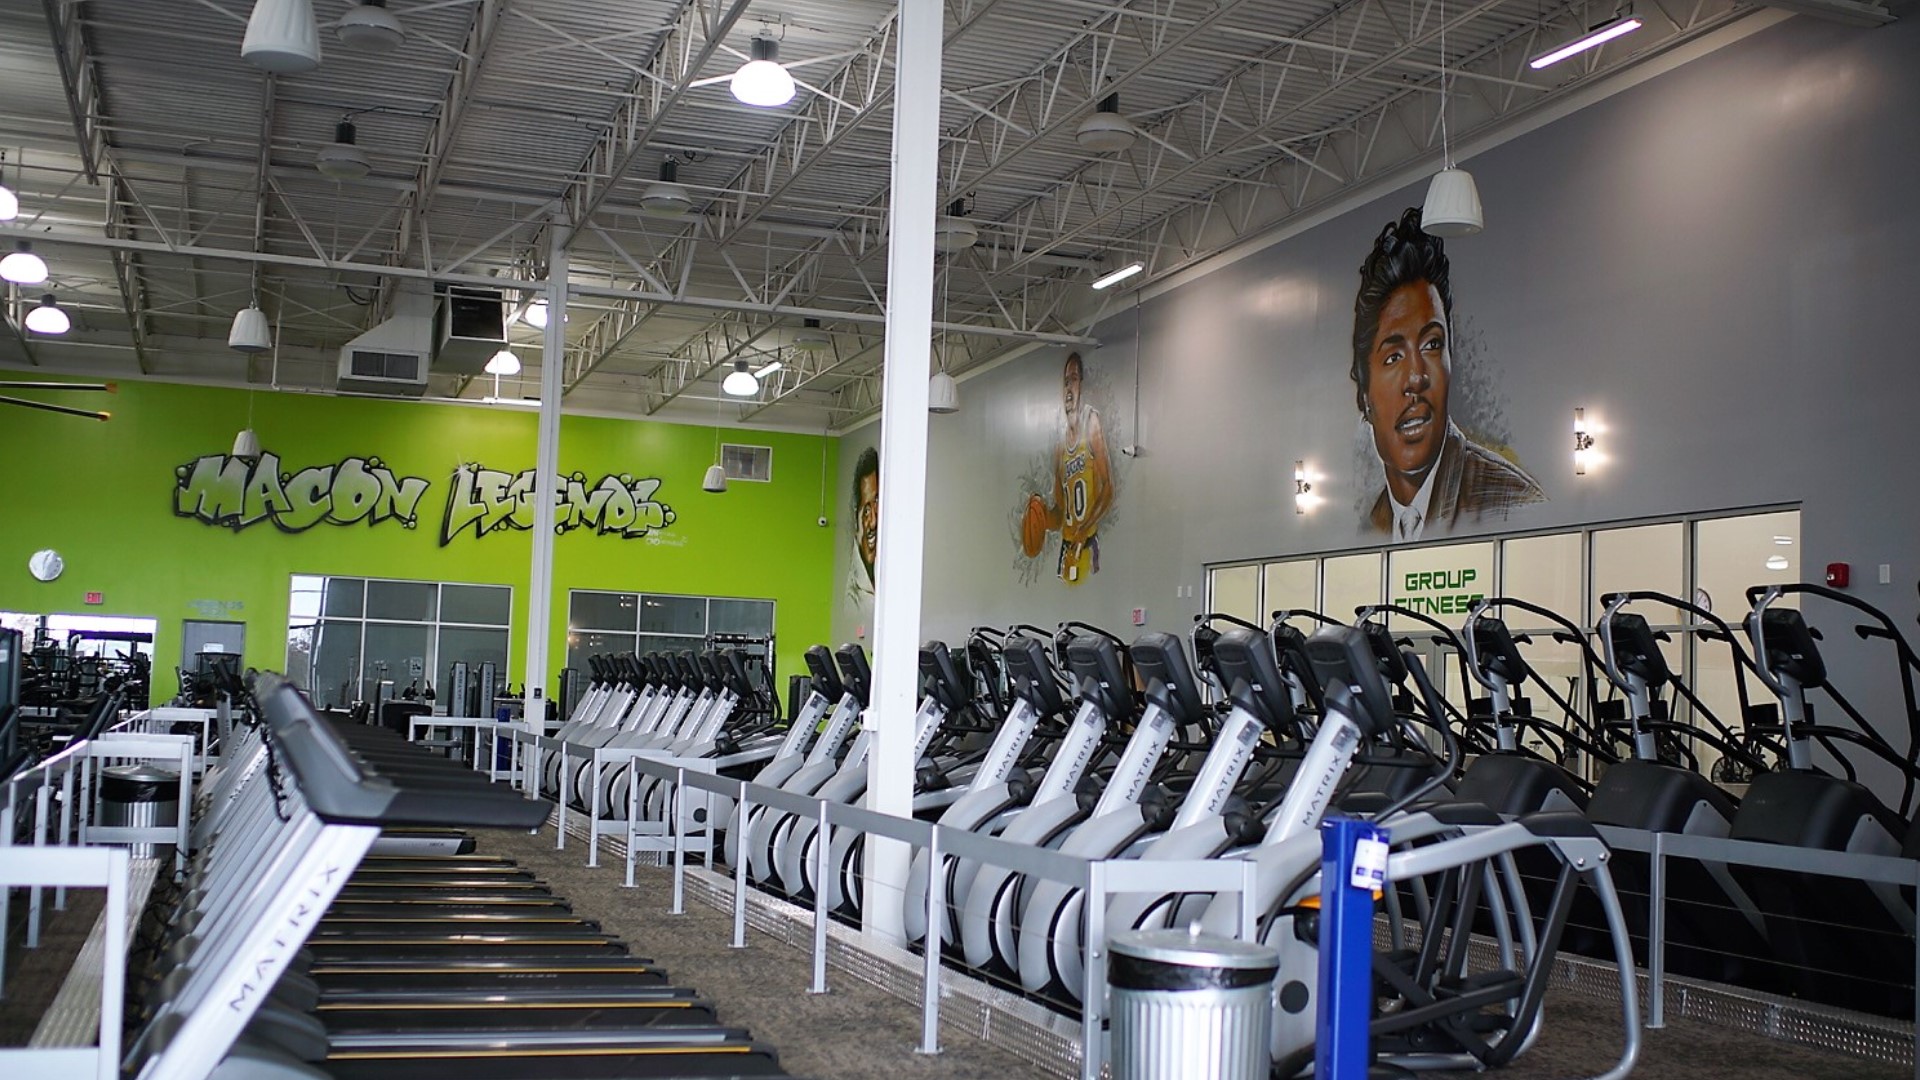 Legends Fitness has a pool, an aerobics room, a cardio theater, spin room, ready-to-go meals, saunas and more!